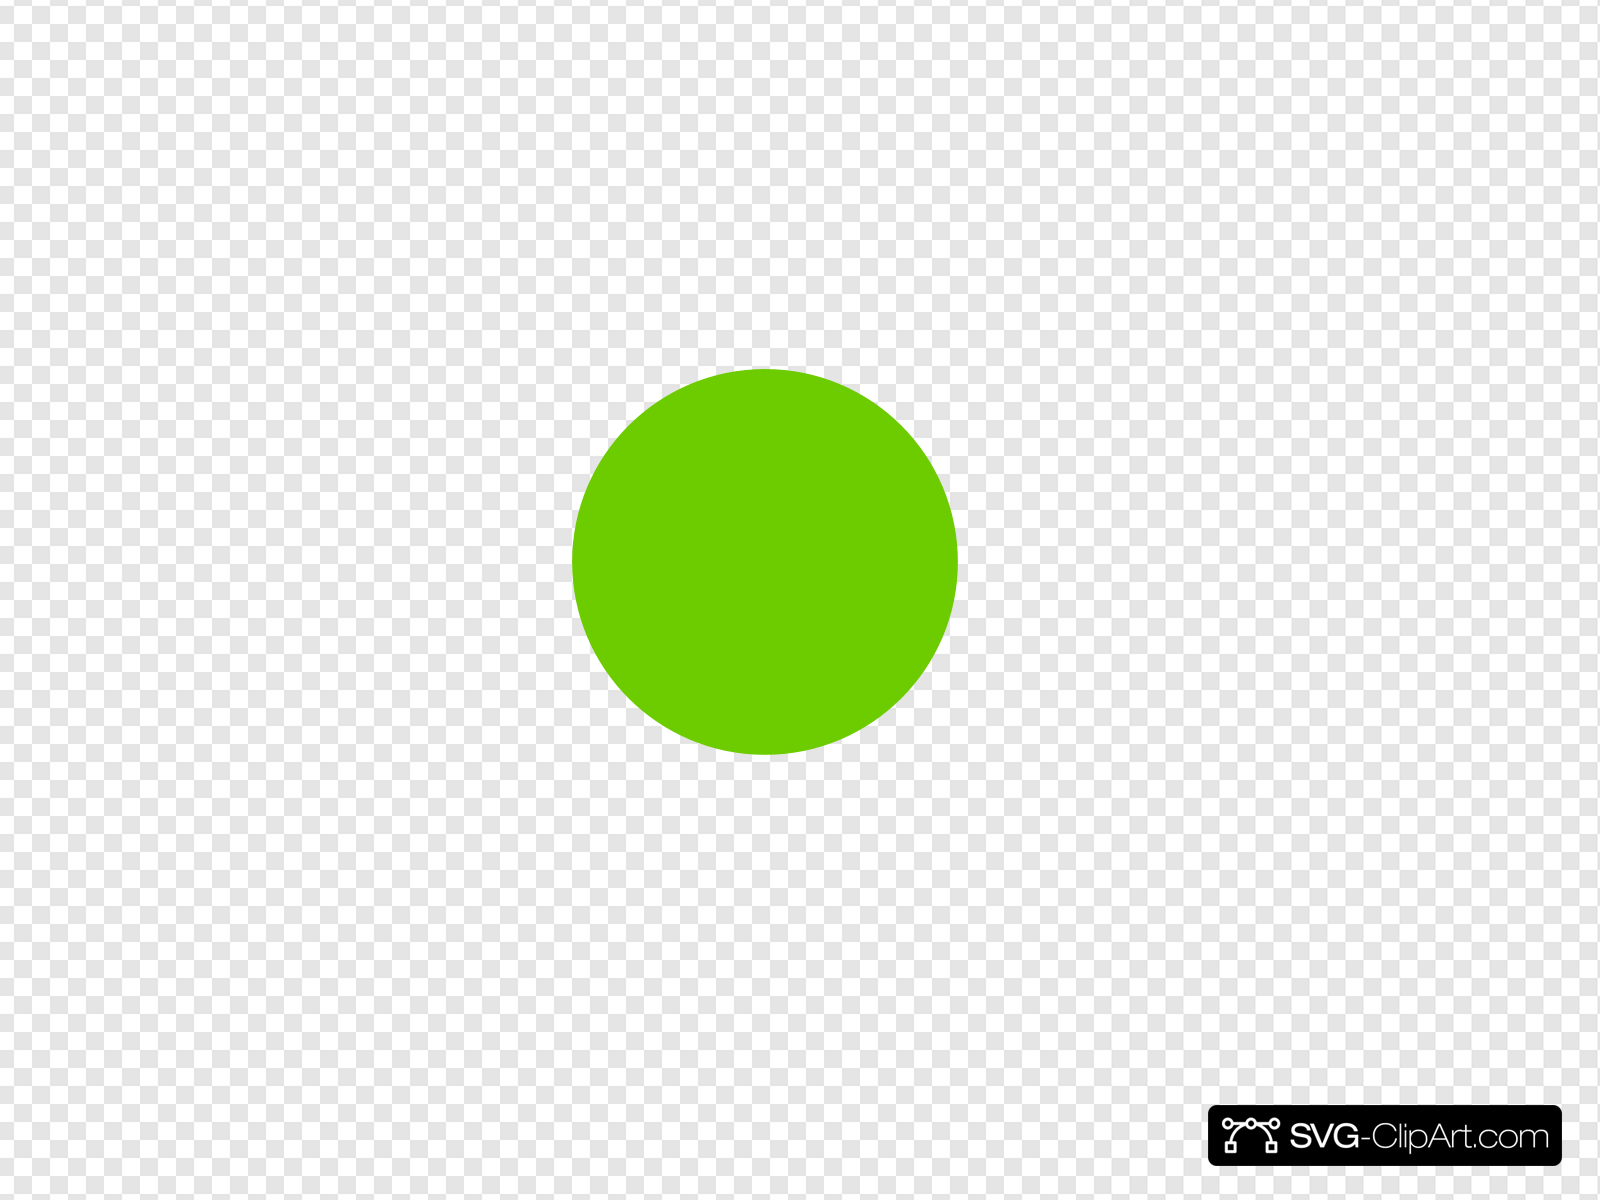 Green Dot Clip art, Icon and SVG.